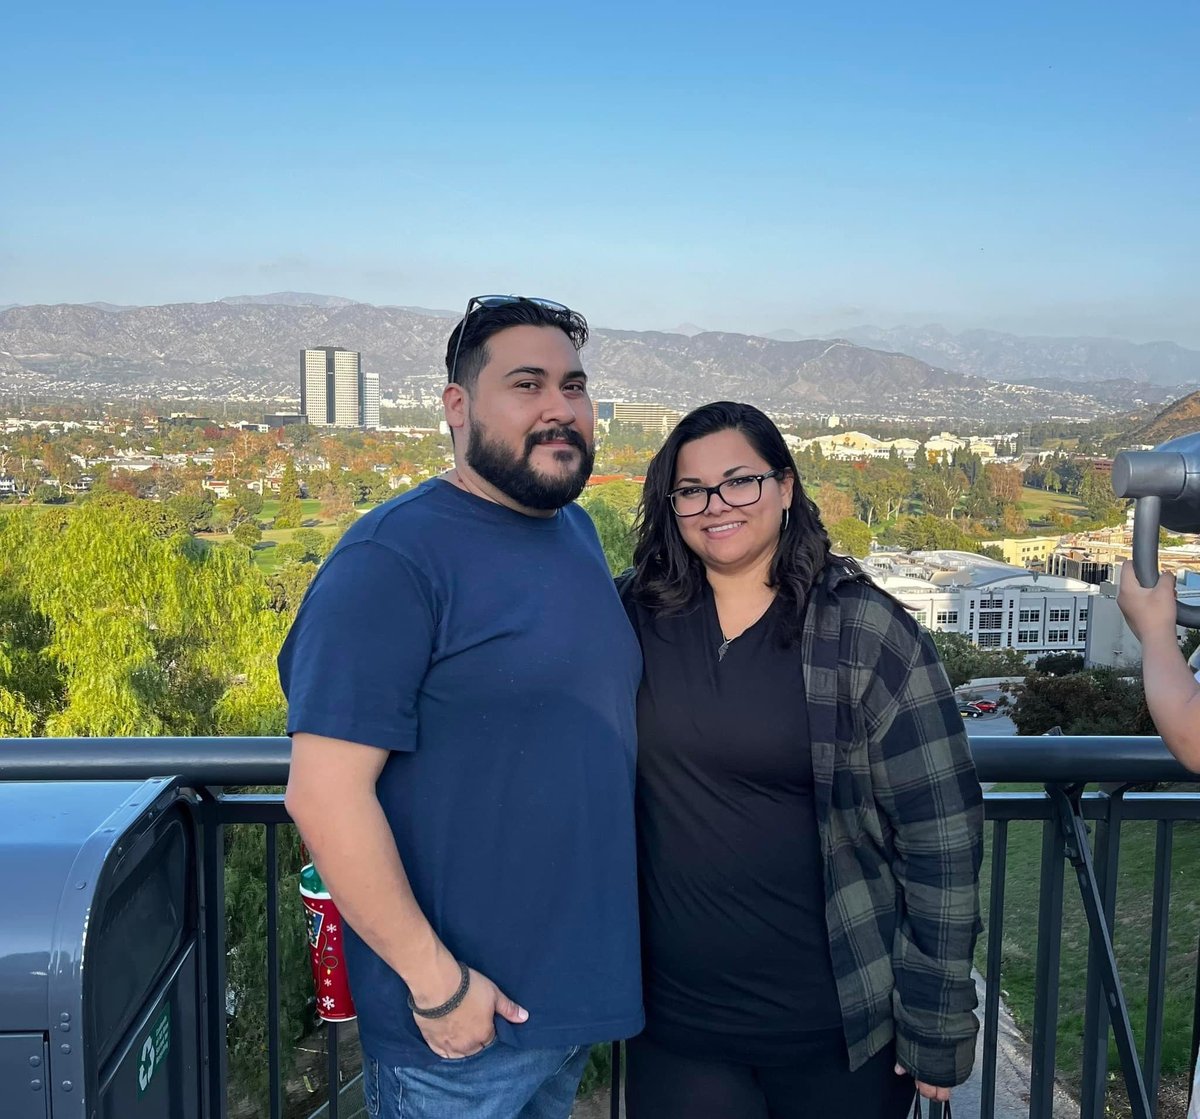 Steven and Agueda with view of mountains behind